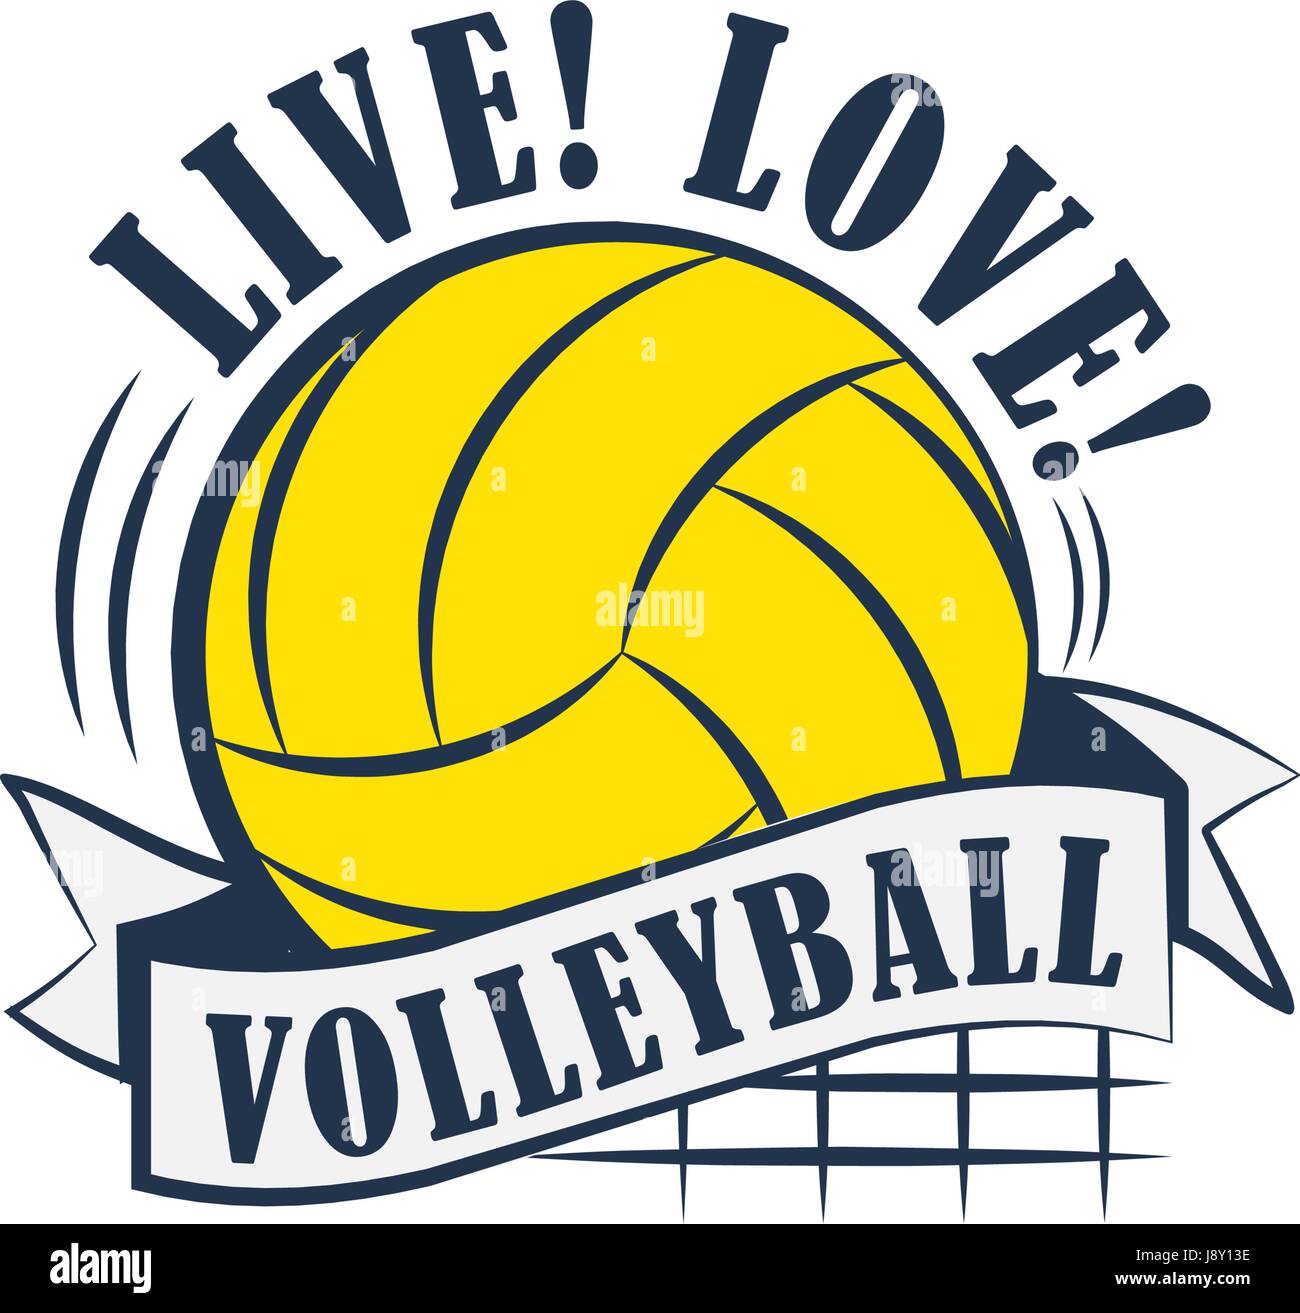 Yellow volleyball emblem Stock Vector